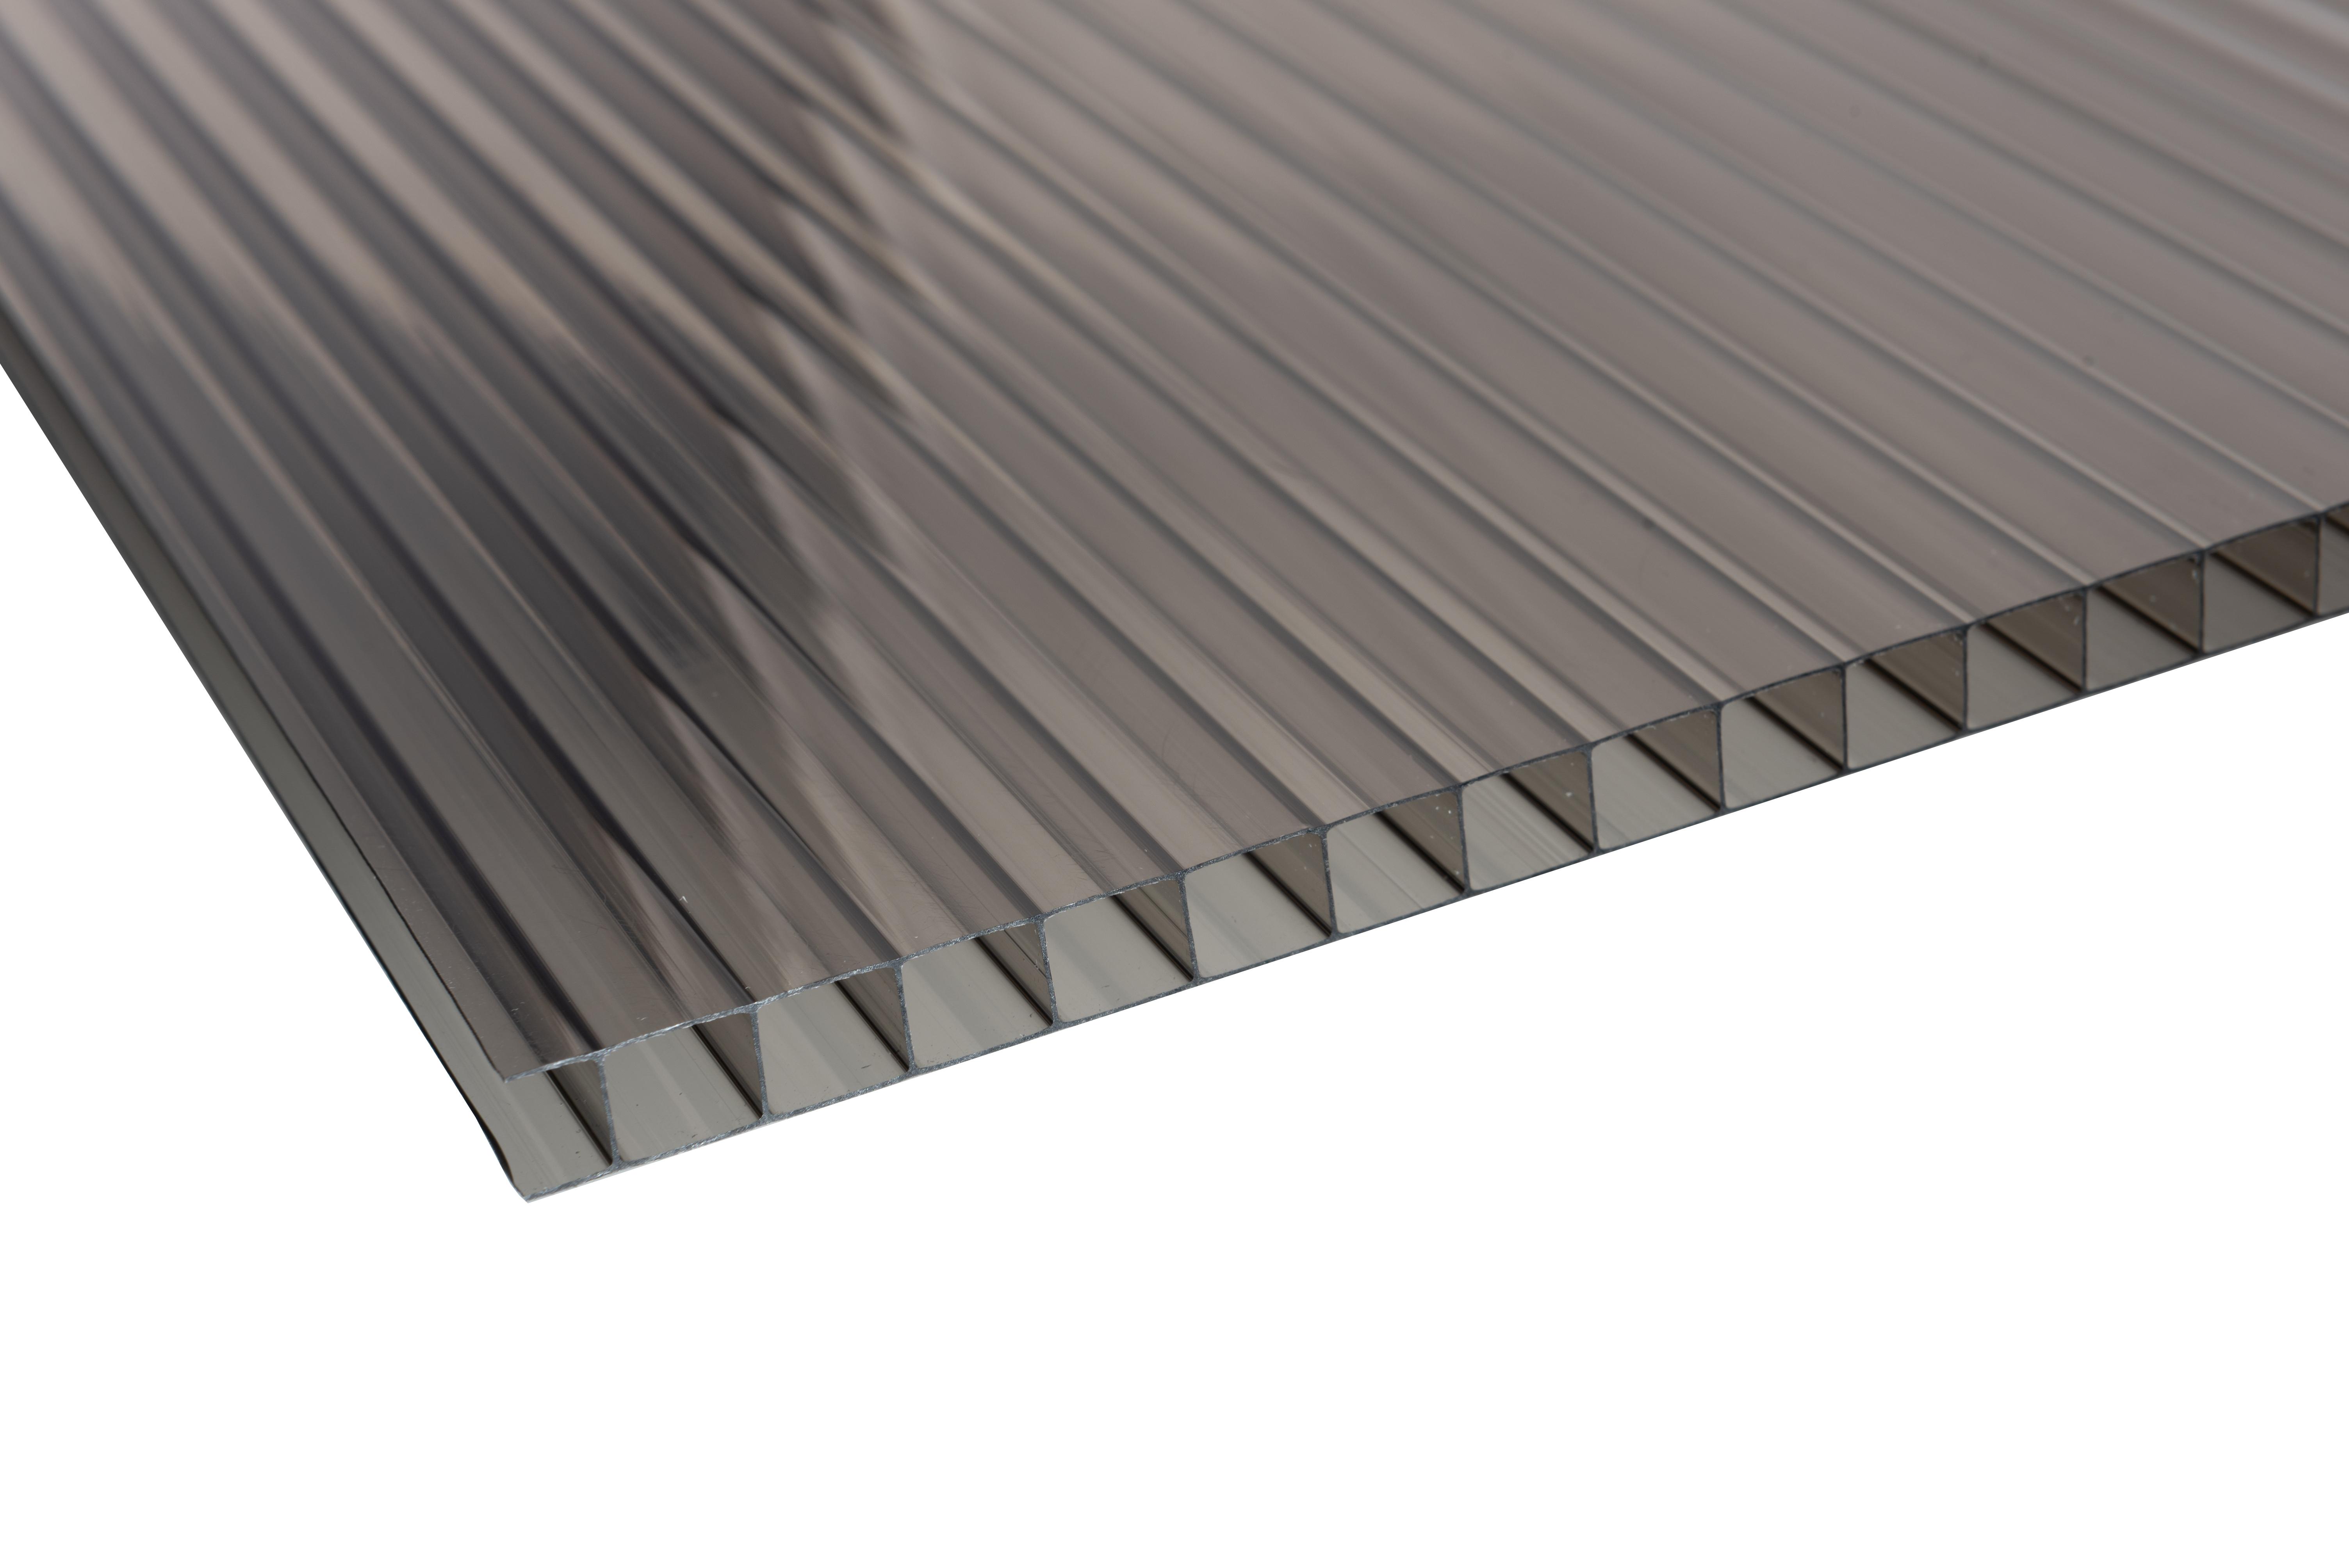 Image of 10mm Bronze Multiwall Polycarbonate Sheet - 2500 x 700mm